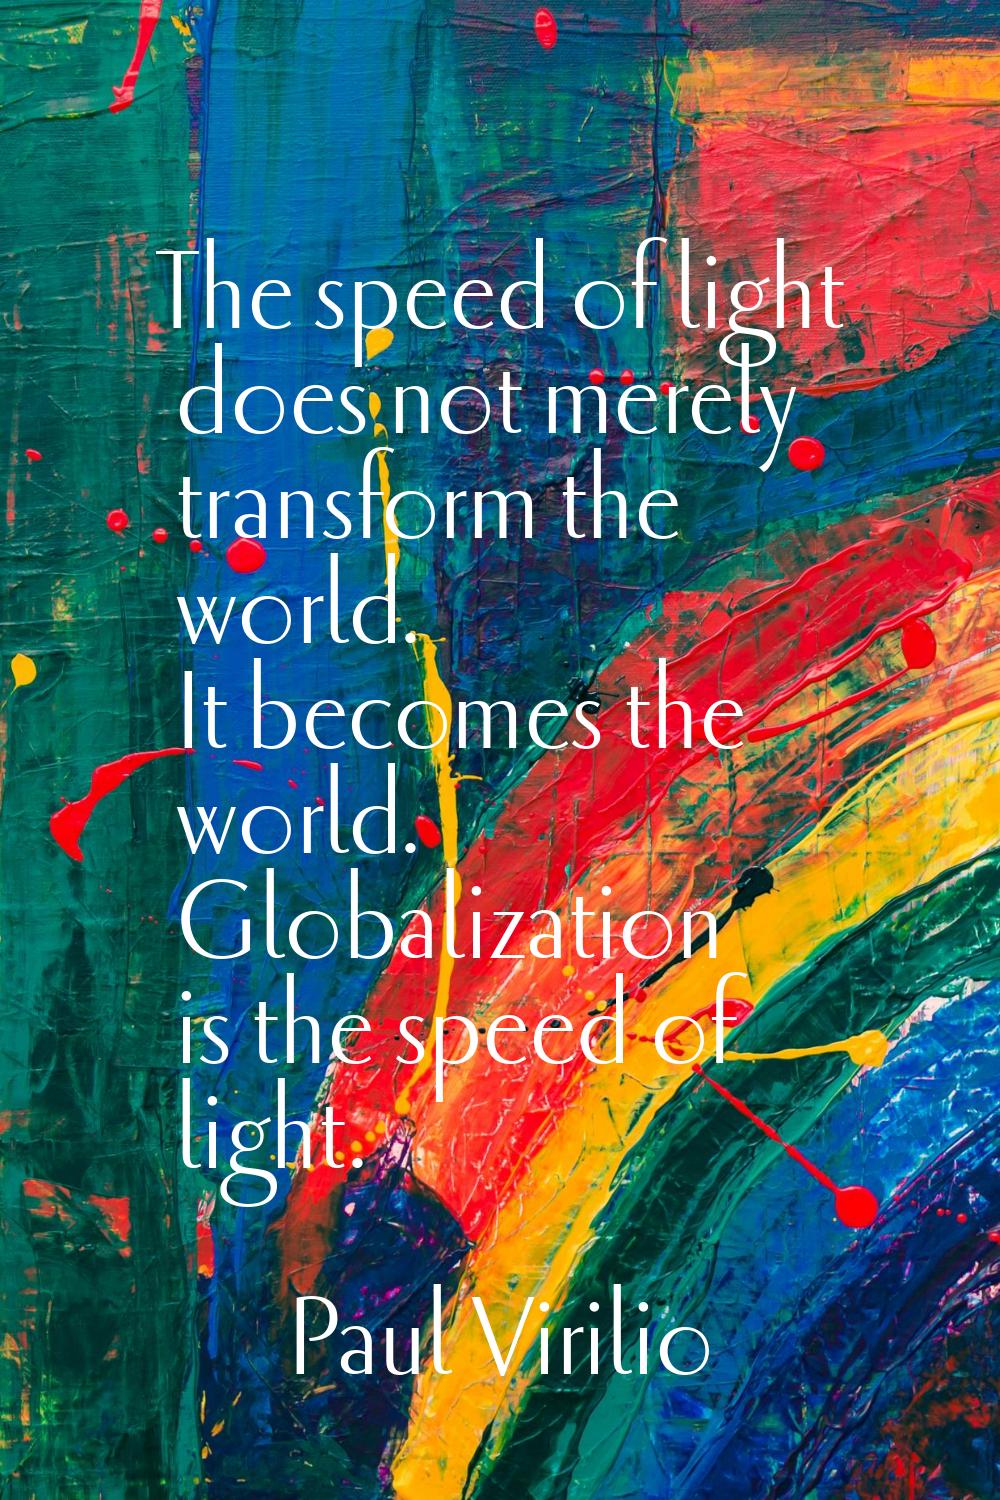 The speed of light does not merely transform the world. It becomes the world. Globalization is the 